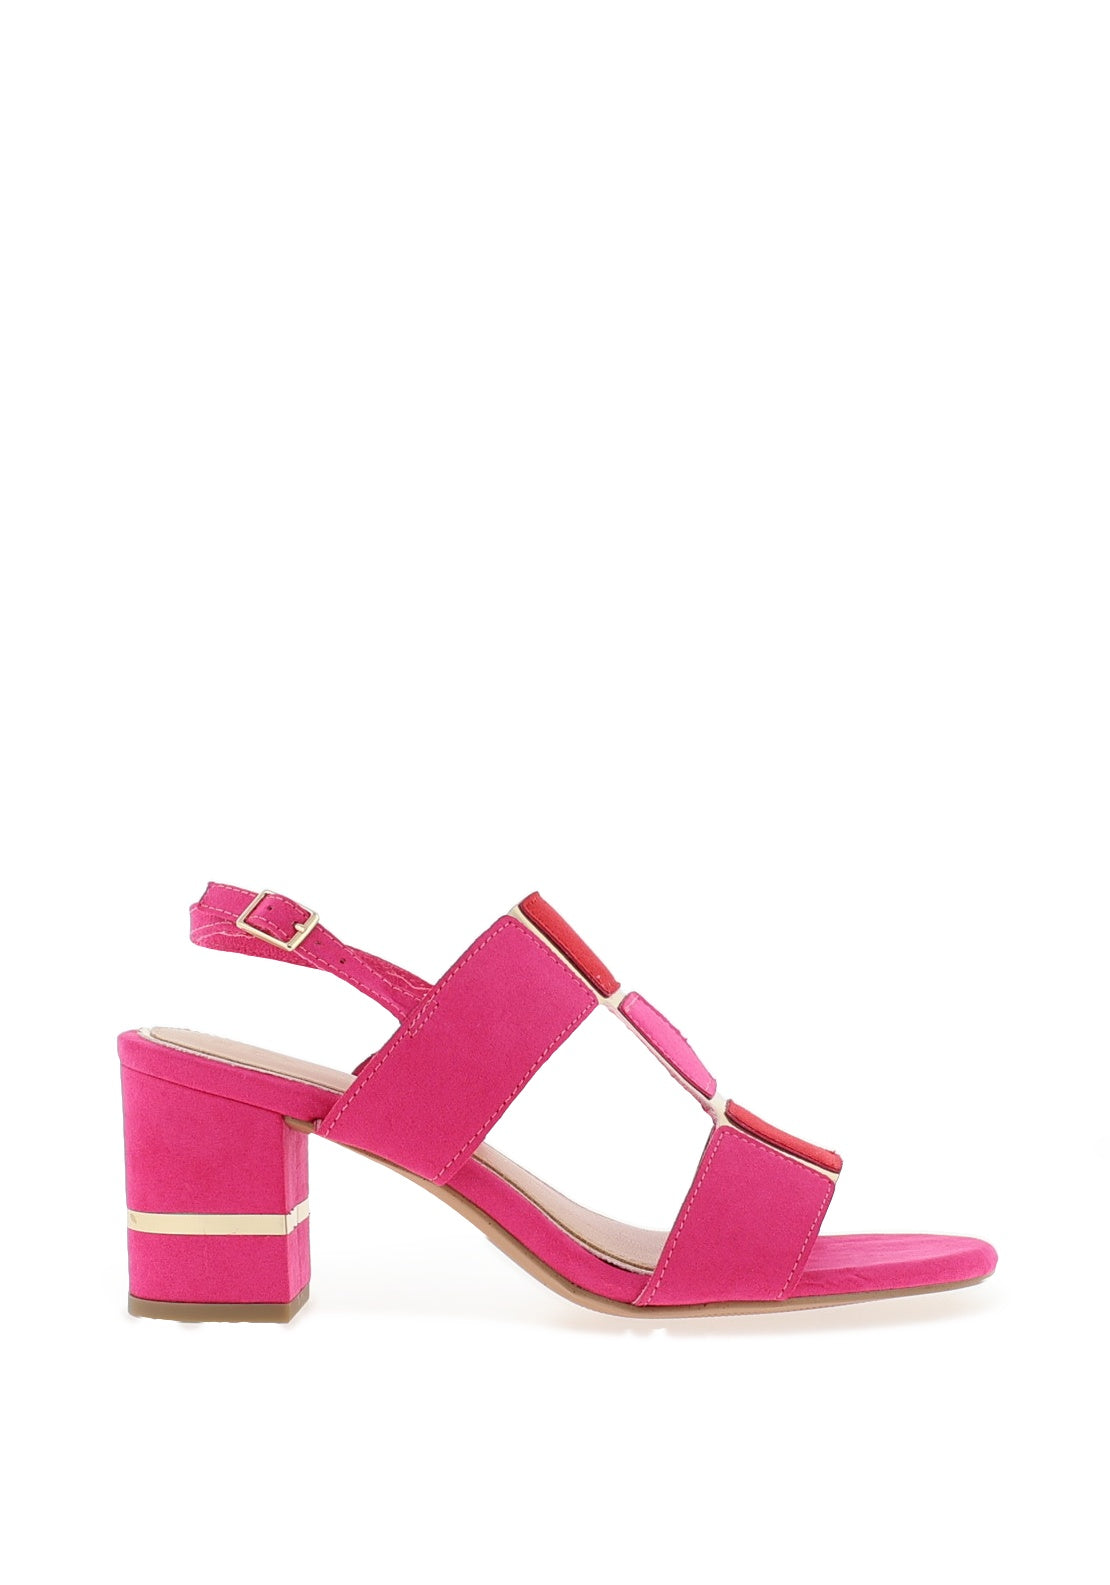 Marco Tozzi Faux Suede Patch Heeled Sandals, Pink & Red - McElhinneys